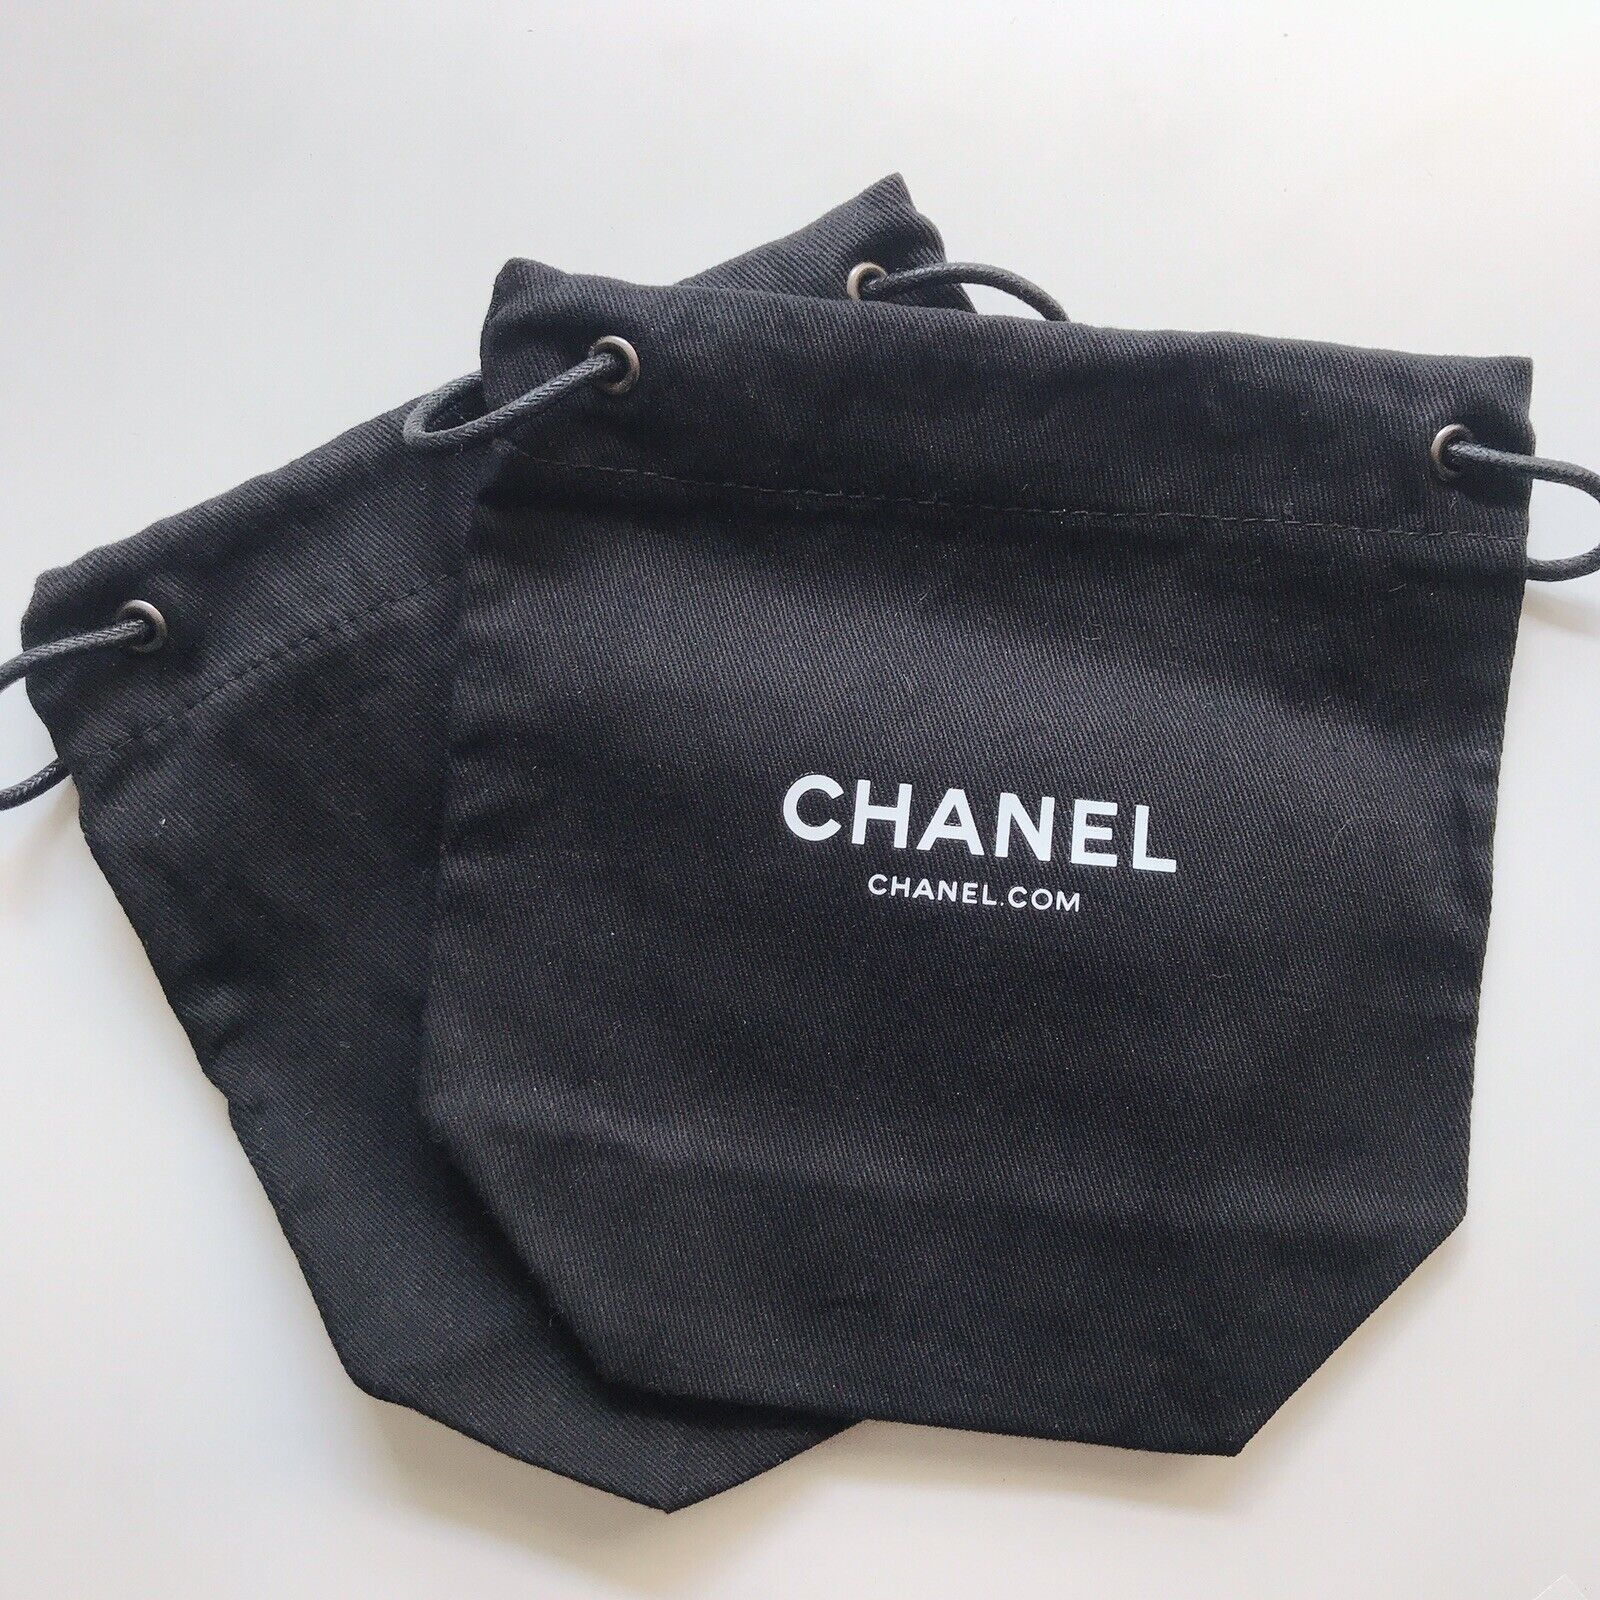 Chanel Drawstring Bag Pouch Dust Bag for Makeups and Accessories Authentic